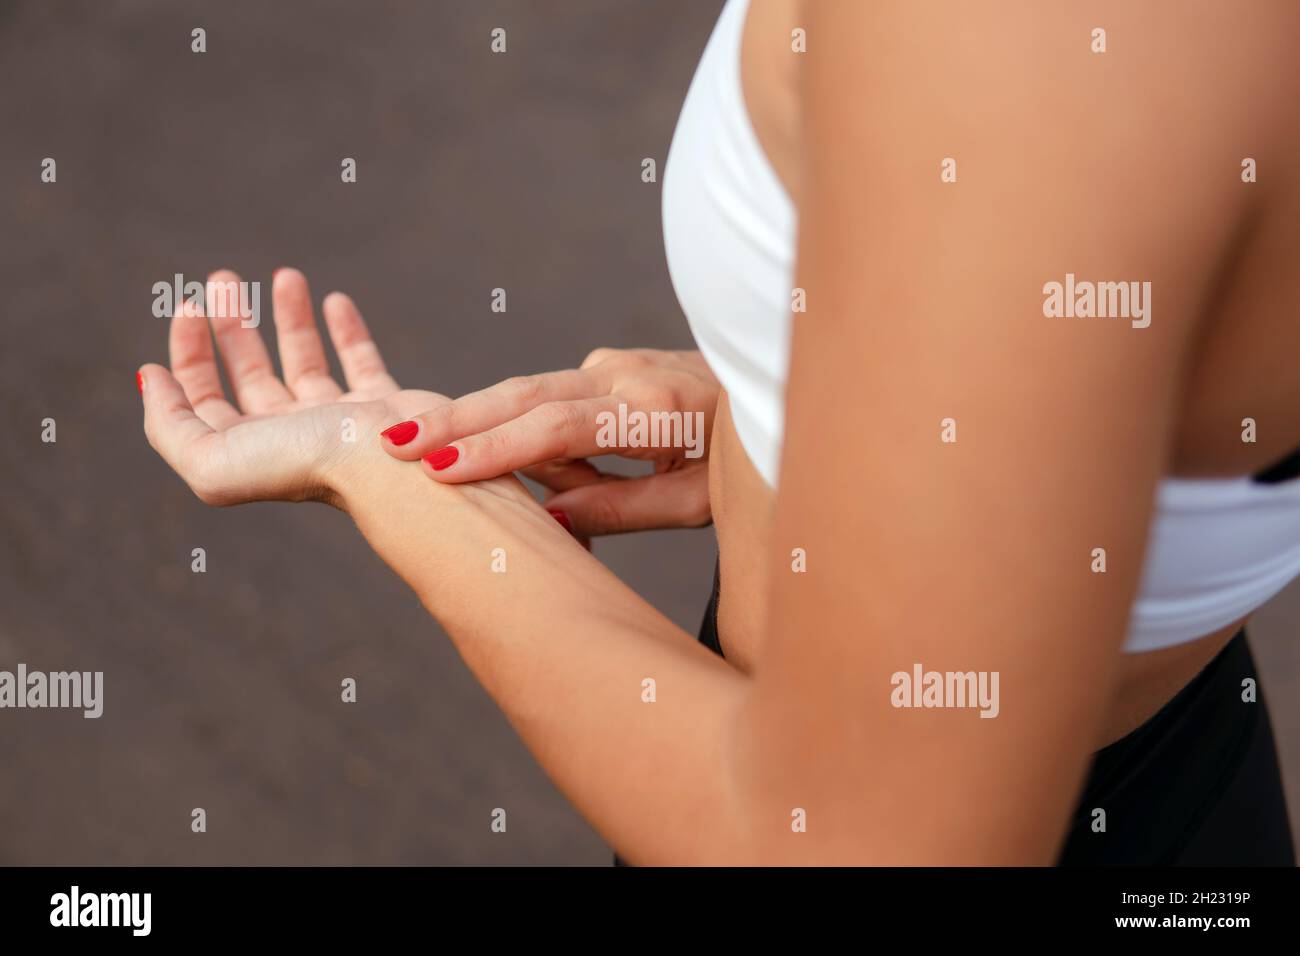 woman checking pulse after running. Hand close-up. Stock Photo